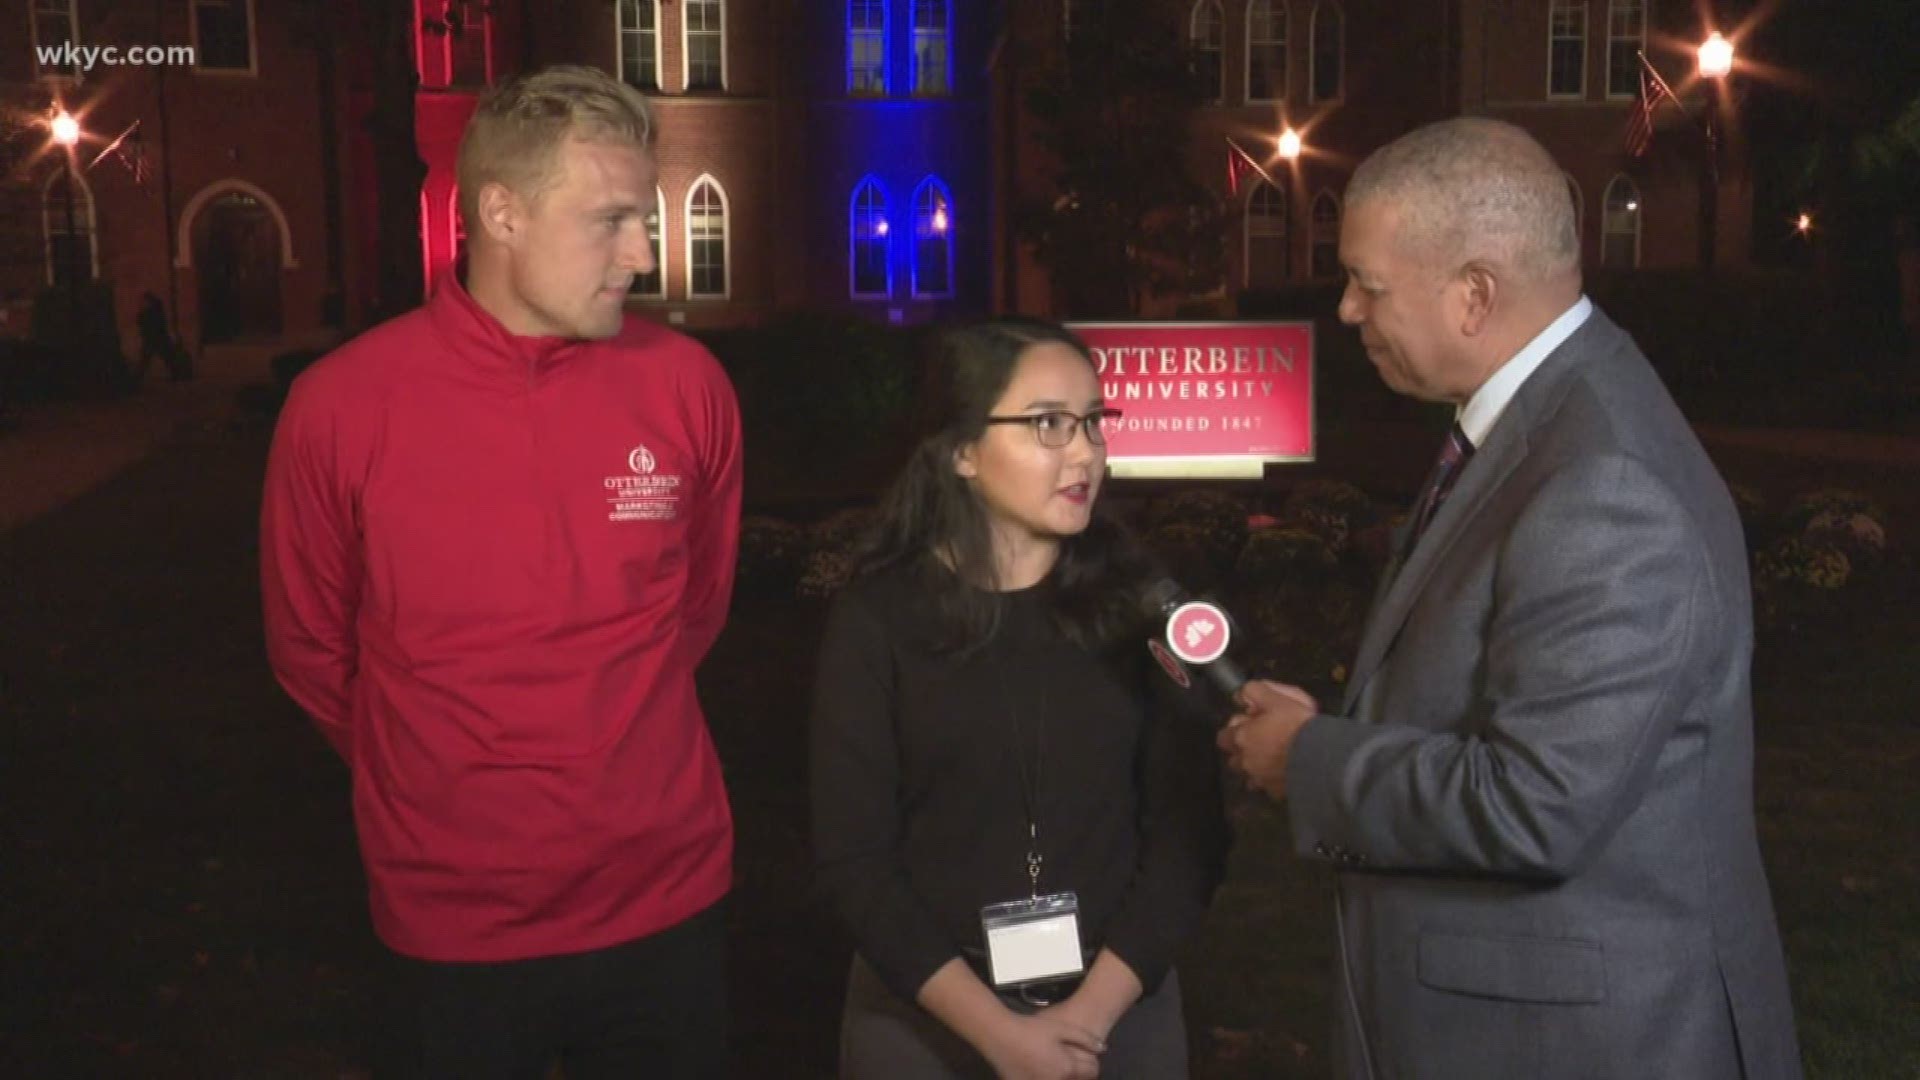 Our Russ Mitchell speaks with two Otterbein University students who saw the debate at a watch party. Did the candidates address their concerns?